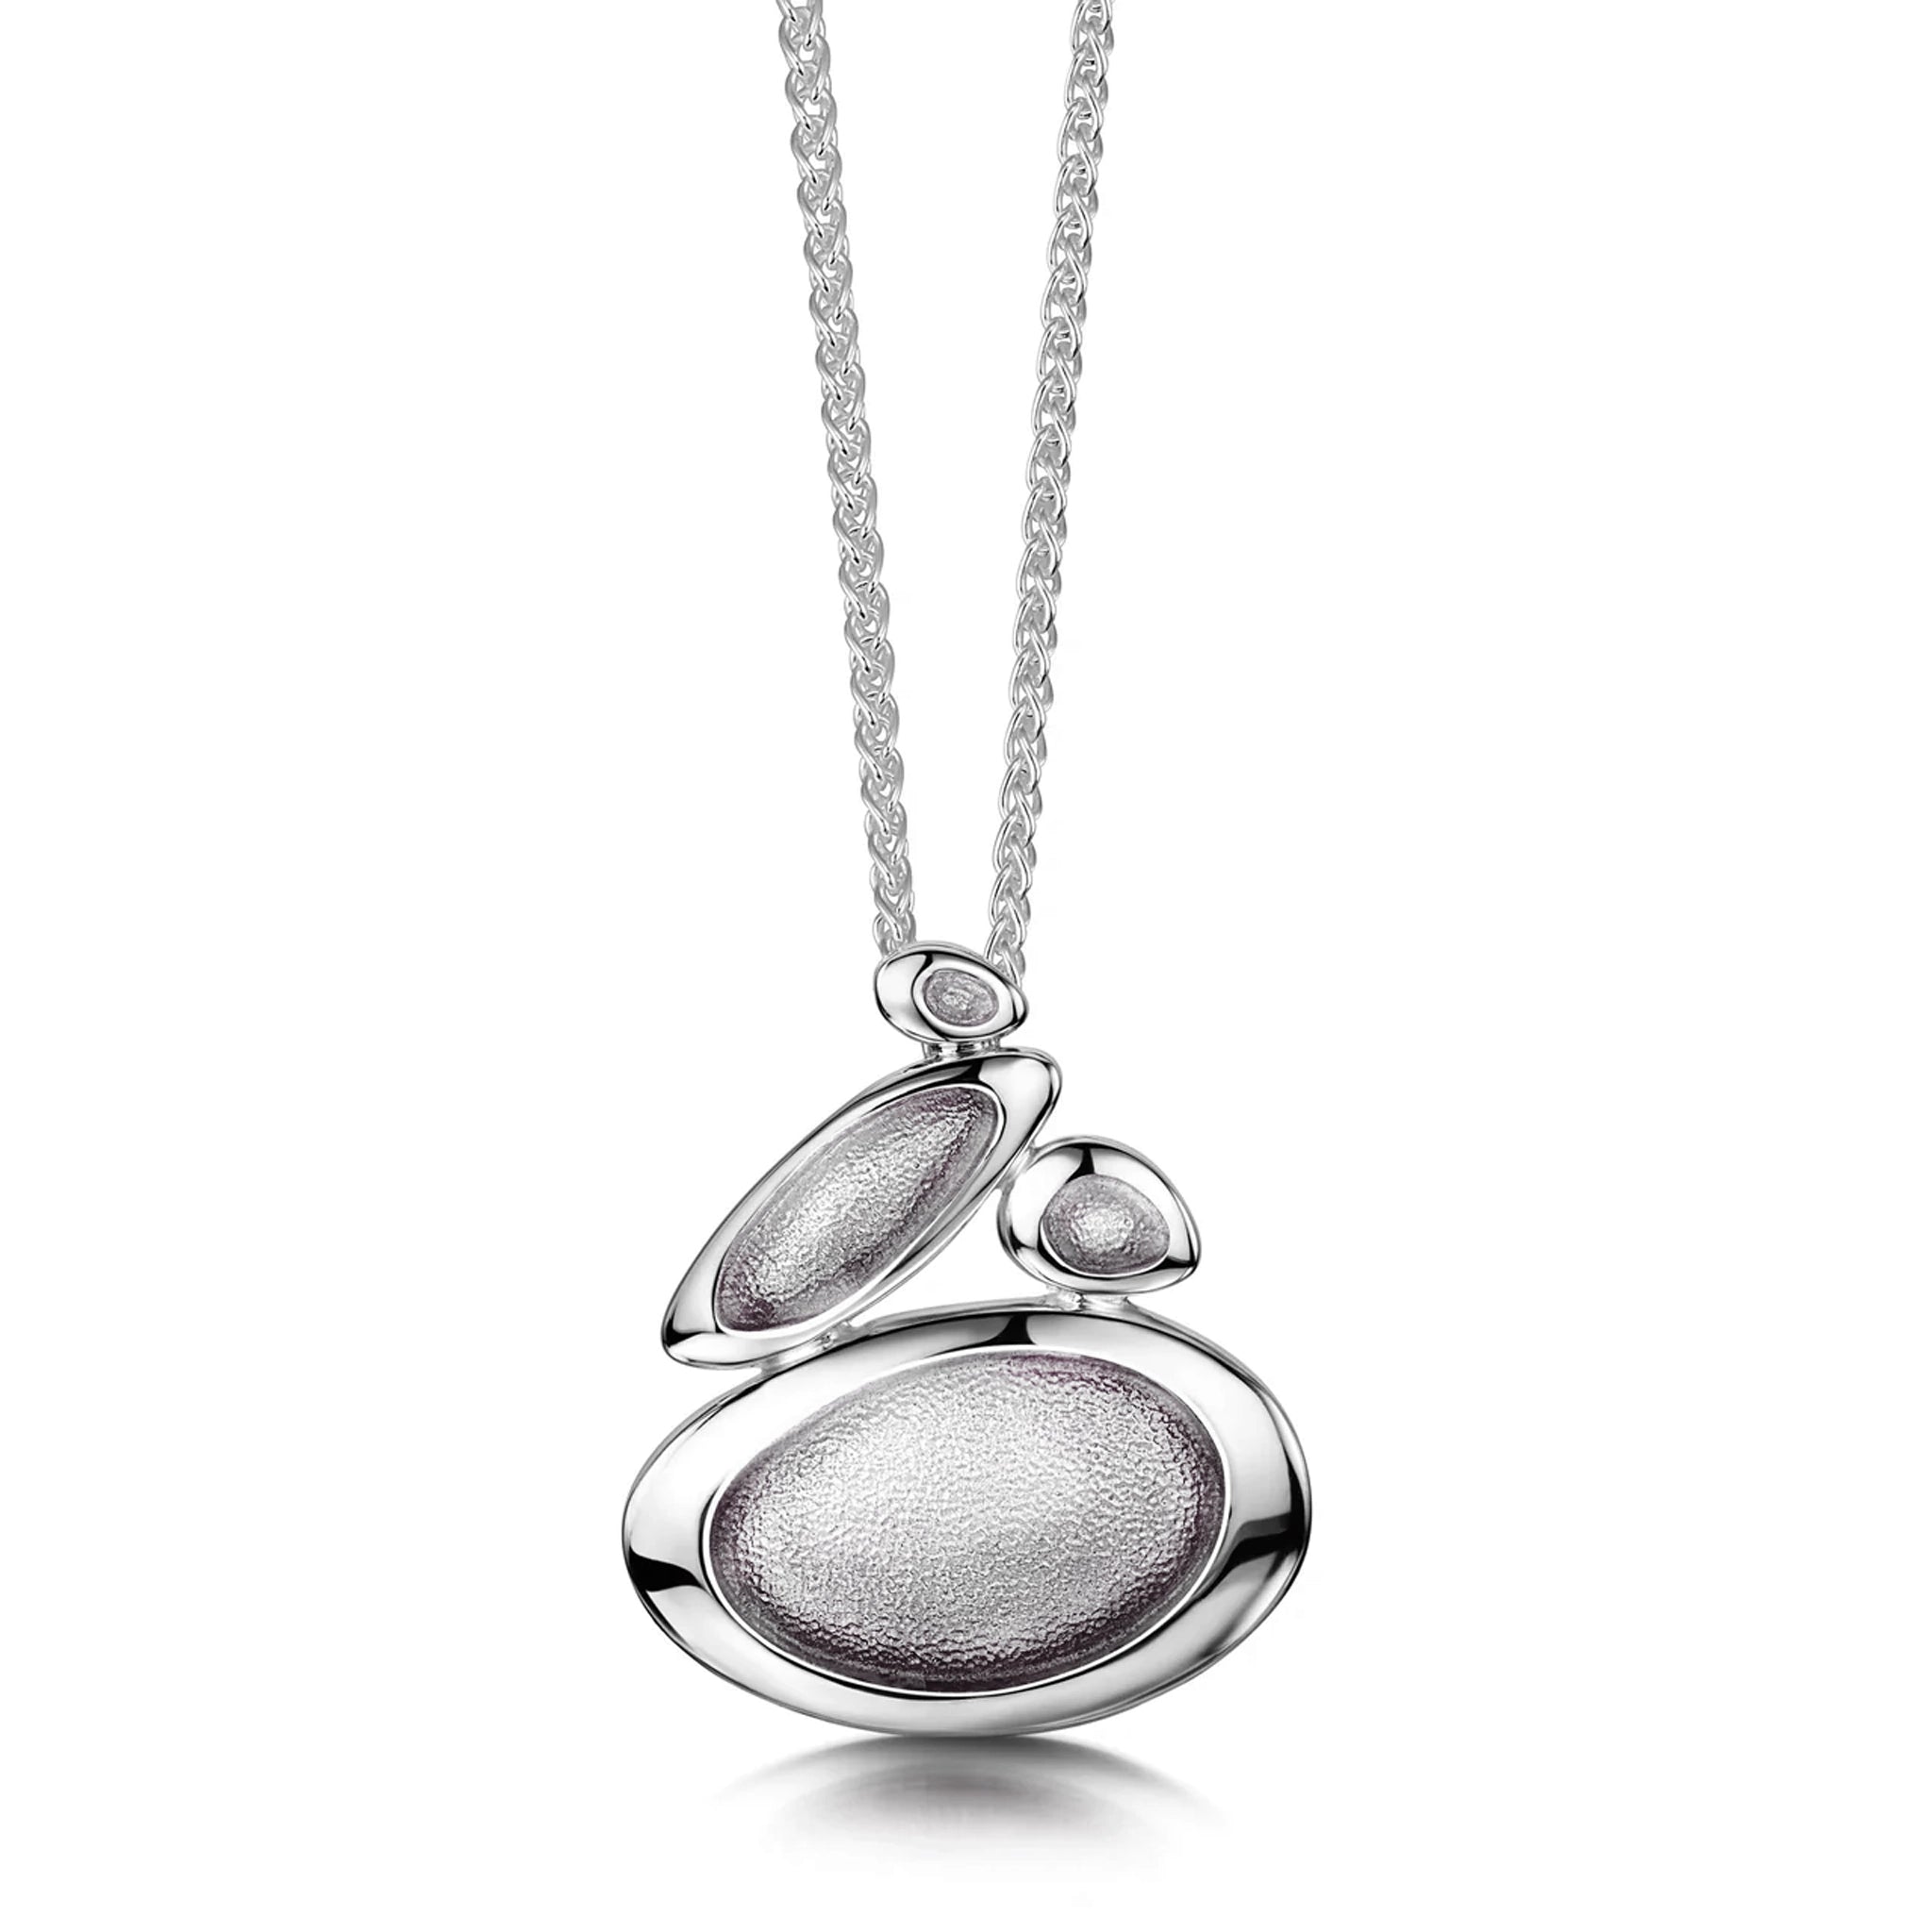 Silver large pendant in organic stacked pebble shape with pearl grey enamel and silver chain